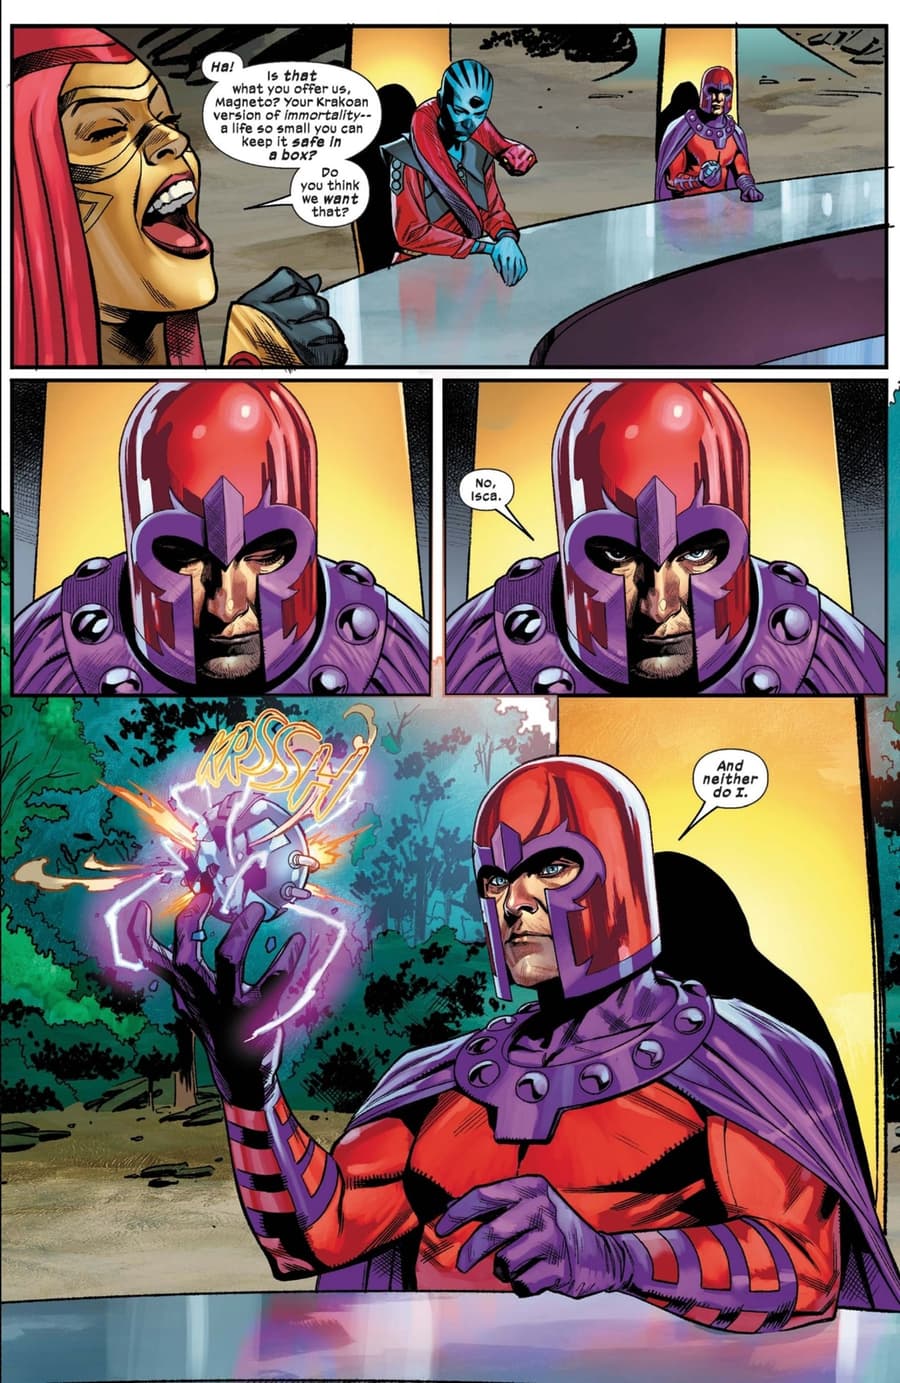 X-MEN RED (2022) #4 page by Al Ewing, Juann Cabal, Andrés Genolet, and Michael Sta. Maria